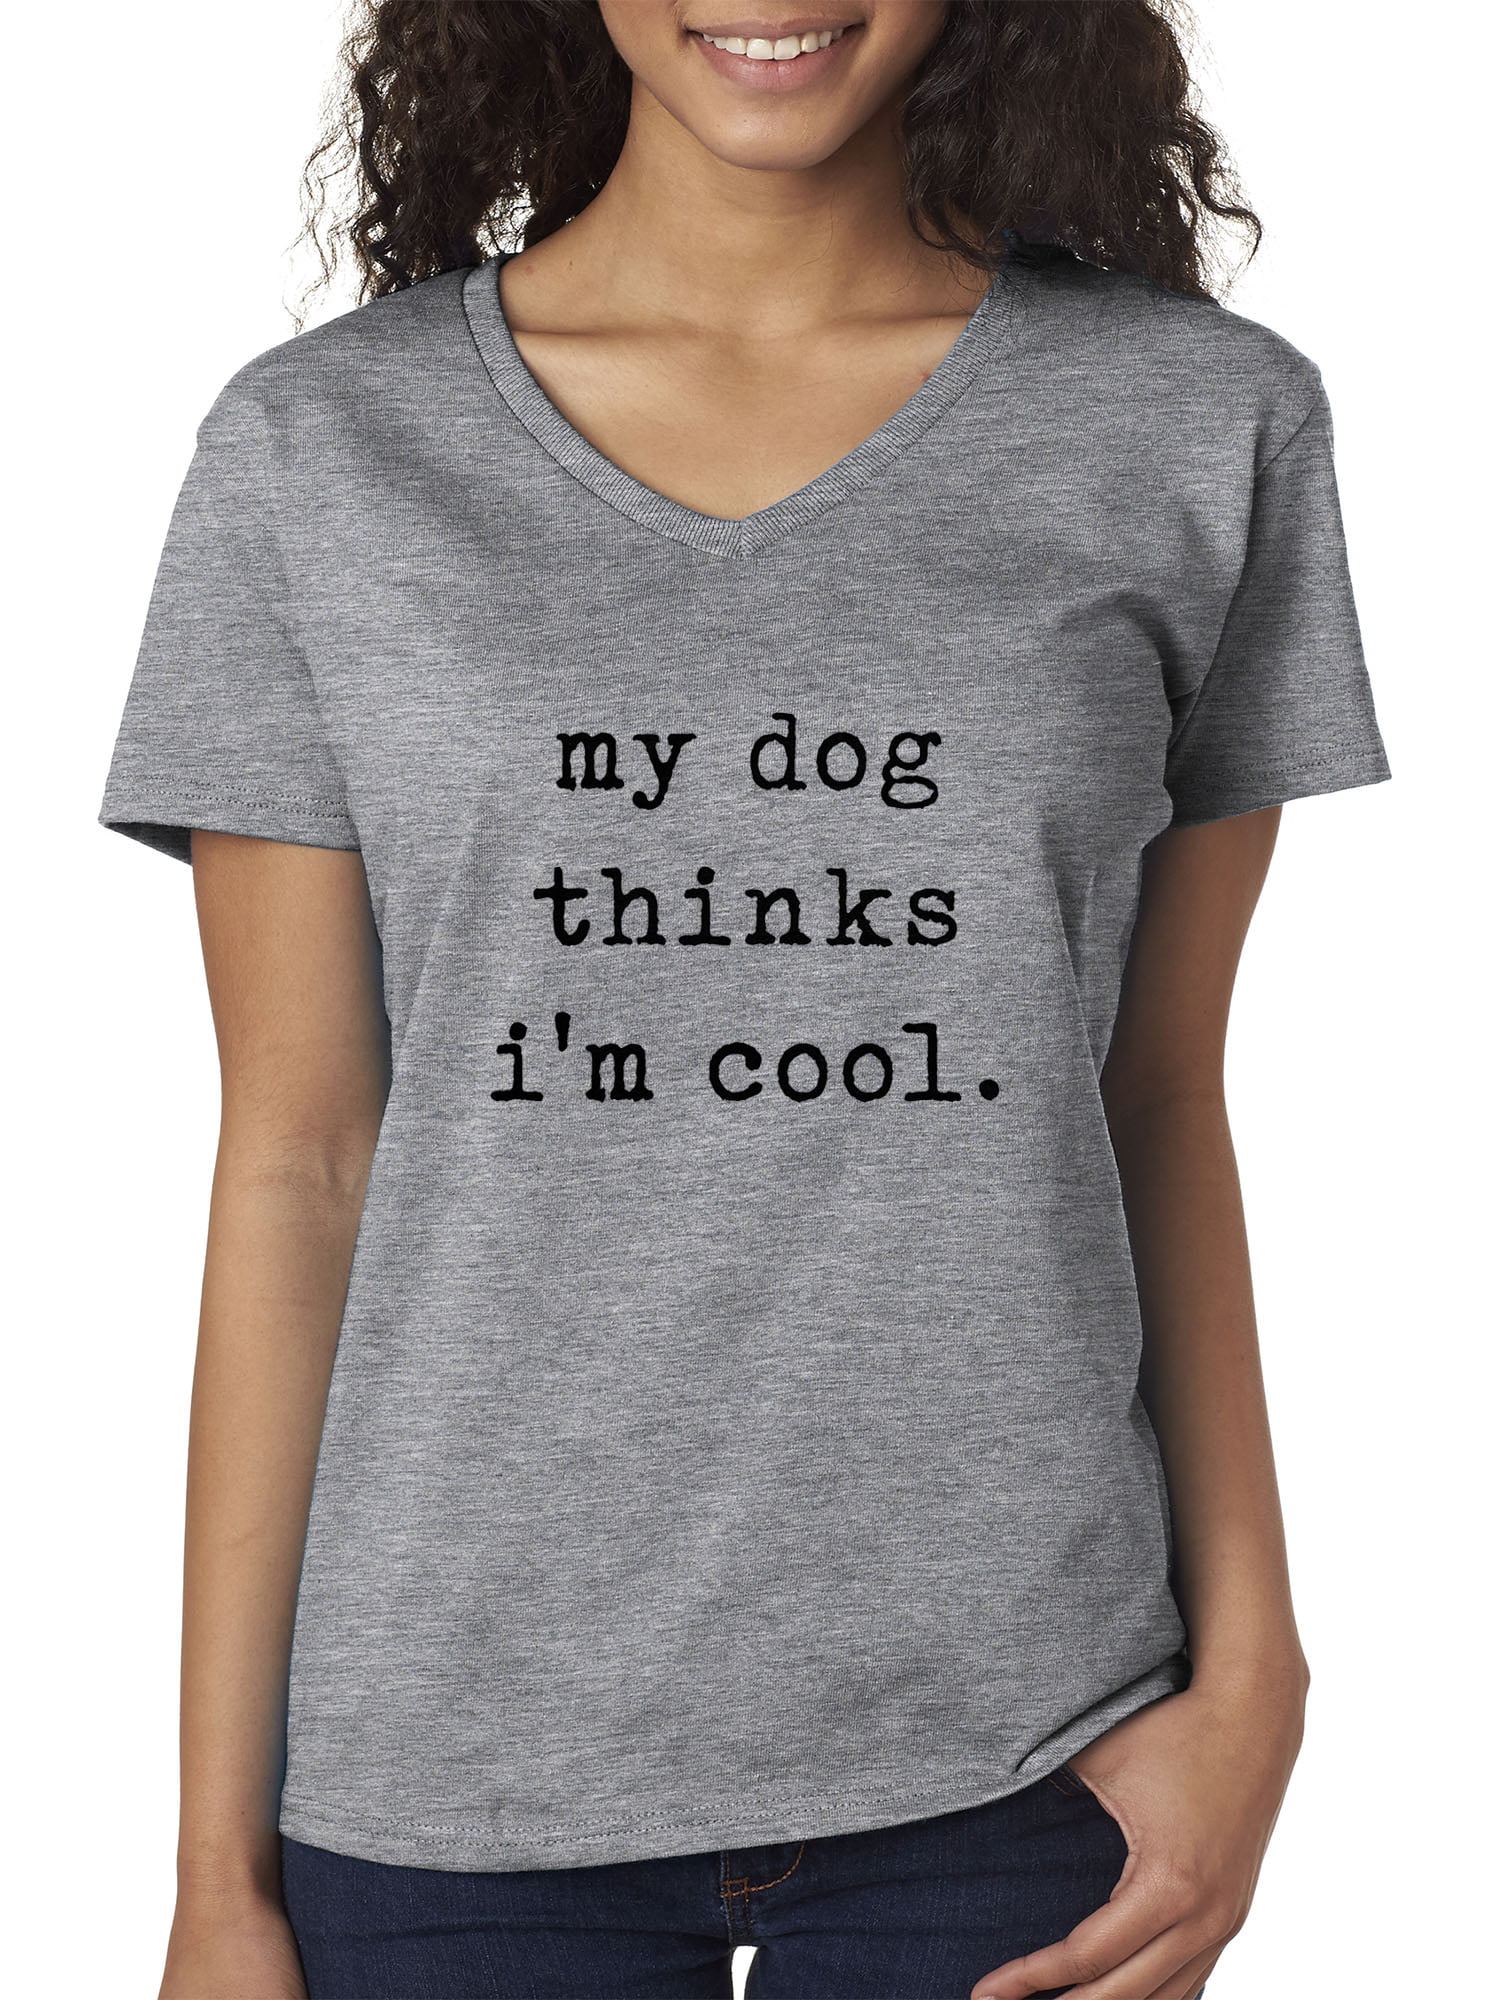 Details about   I'm Only Talking To My Dog Today Women's V-Neck T-shirt Funny Dog Mom Dad Tee